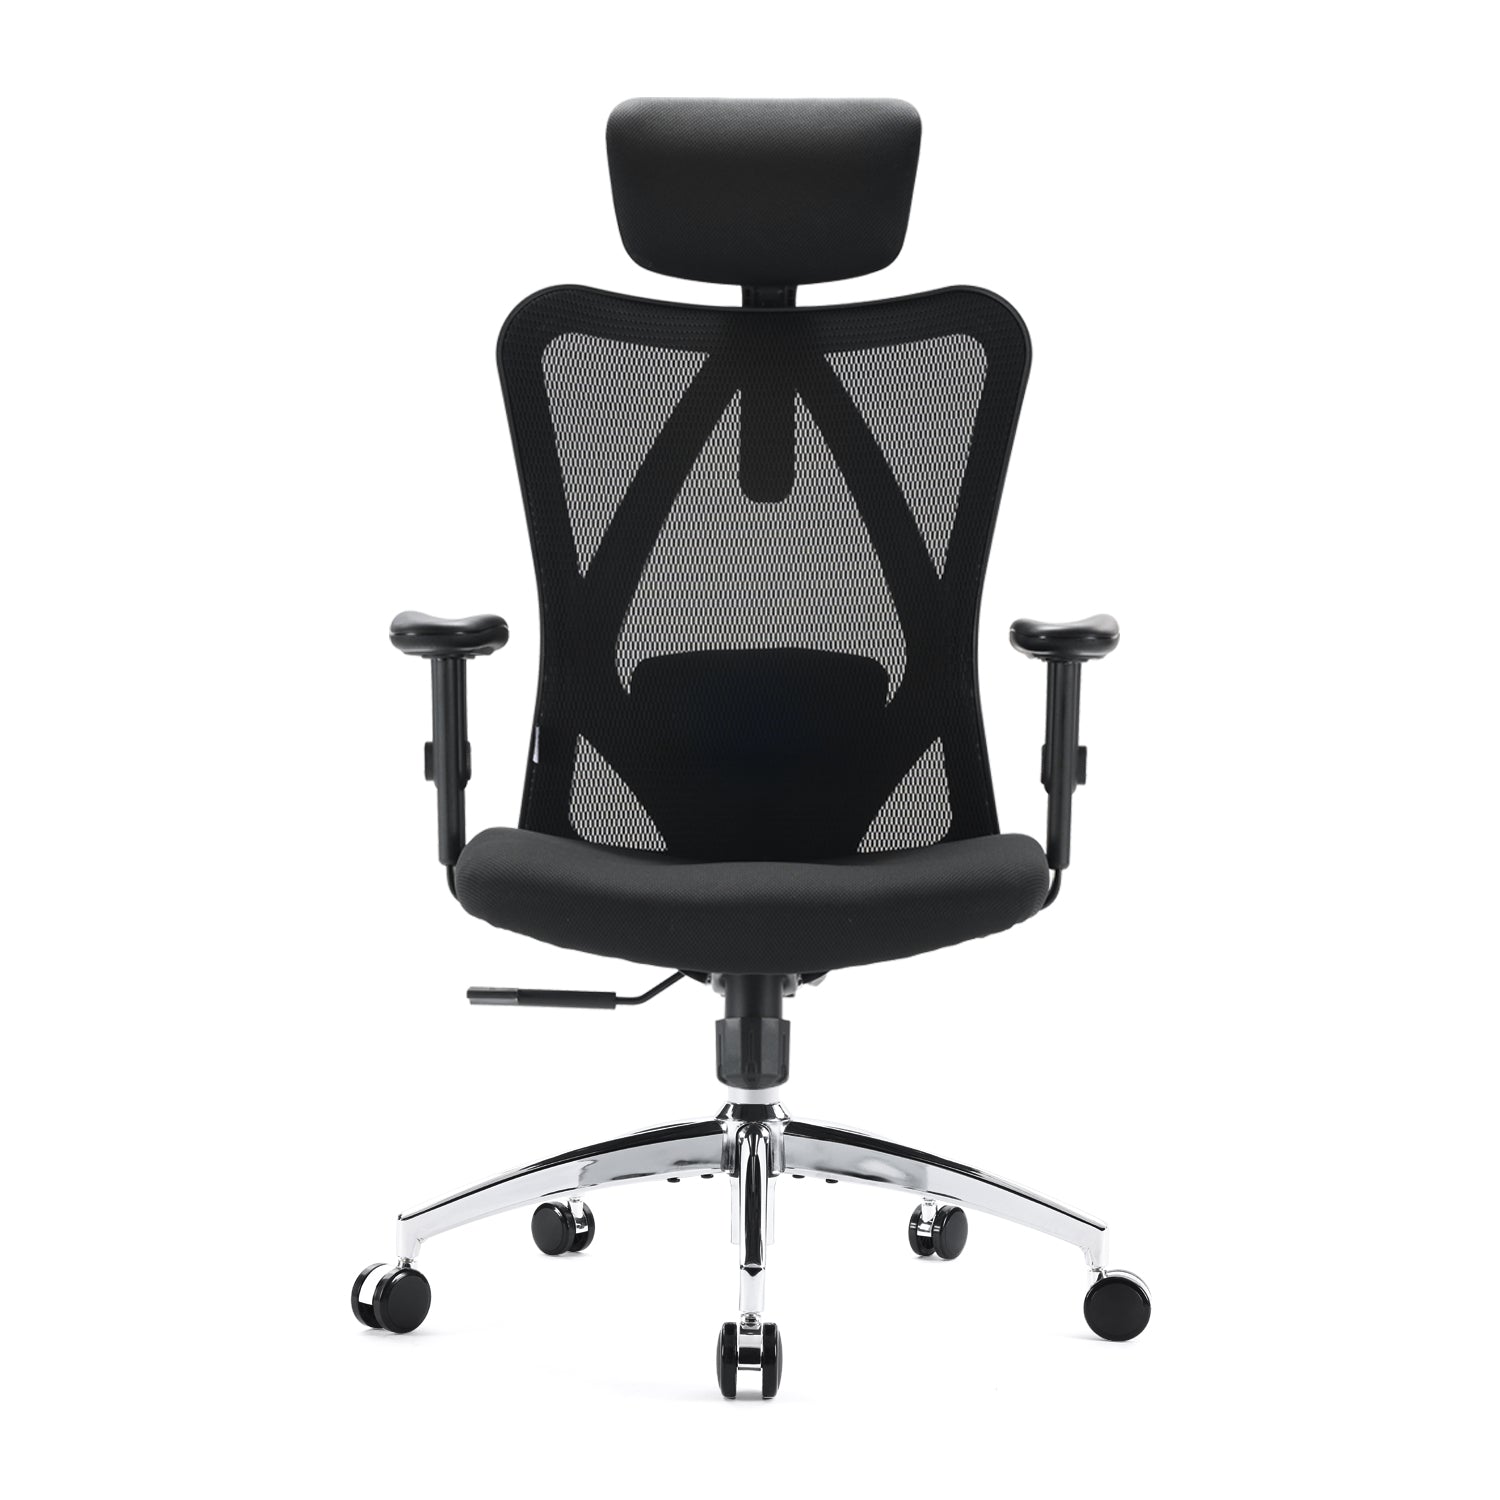 Sihoo M18 Classic Office Chair With Triple Spinal Relief (Use Code to get 50%OFF)